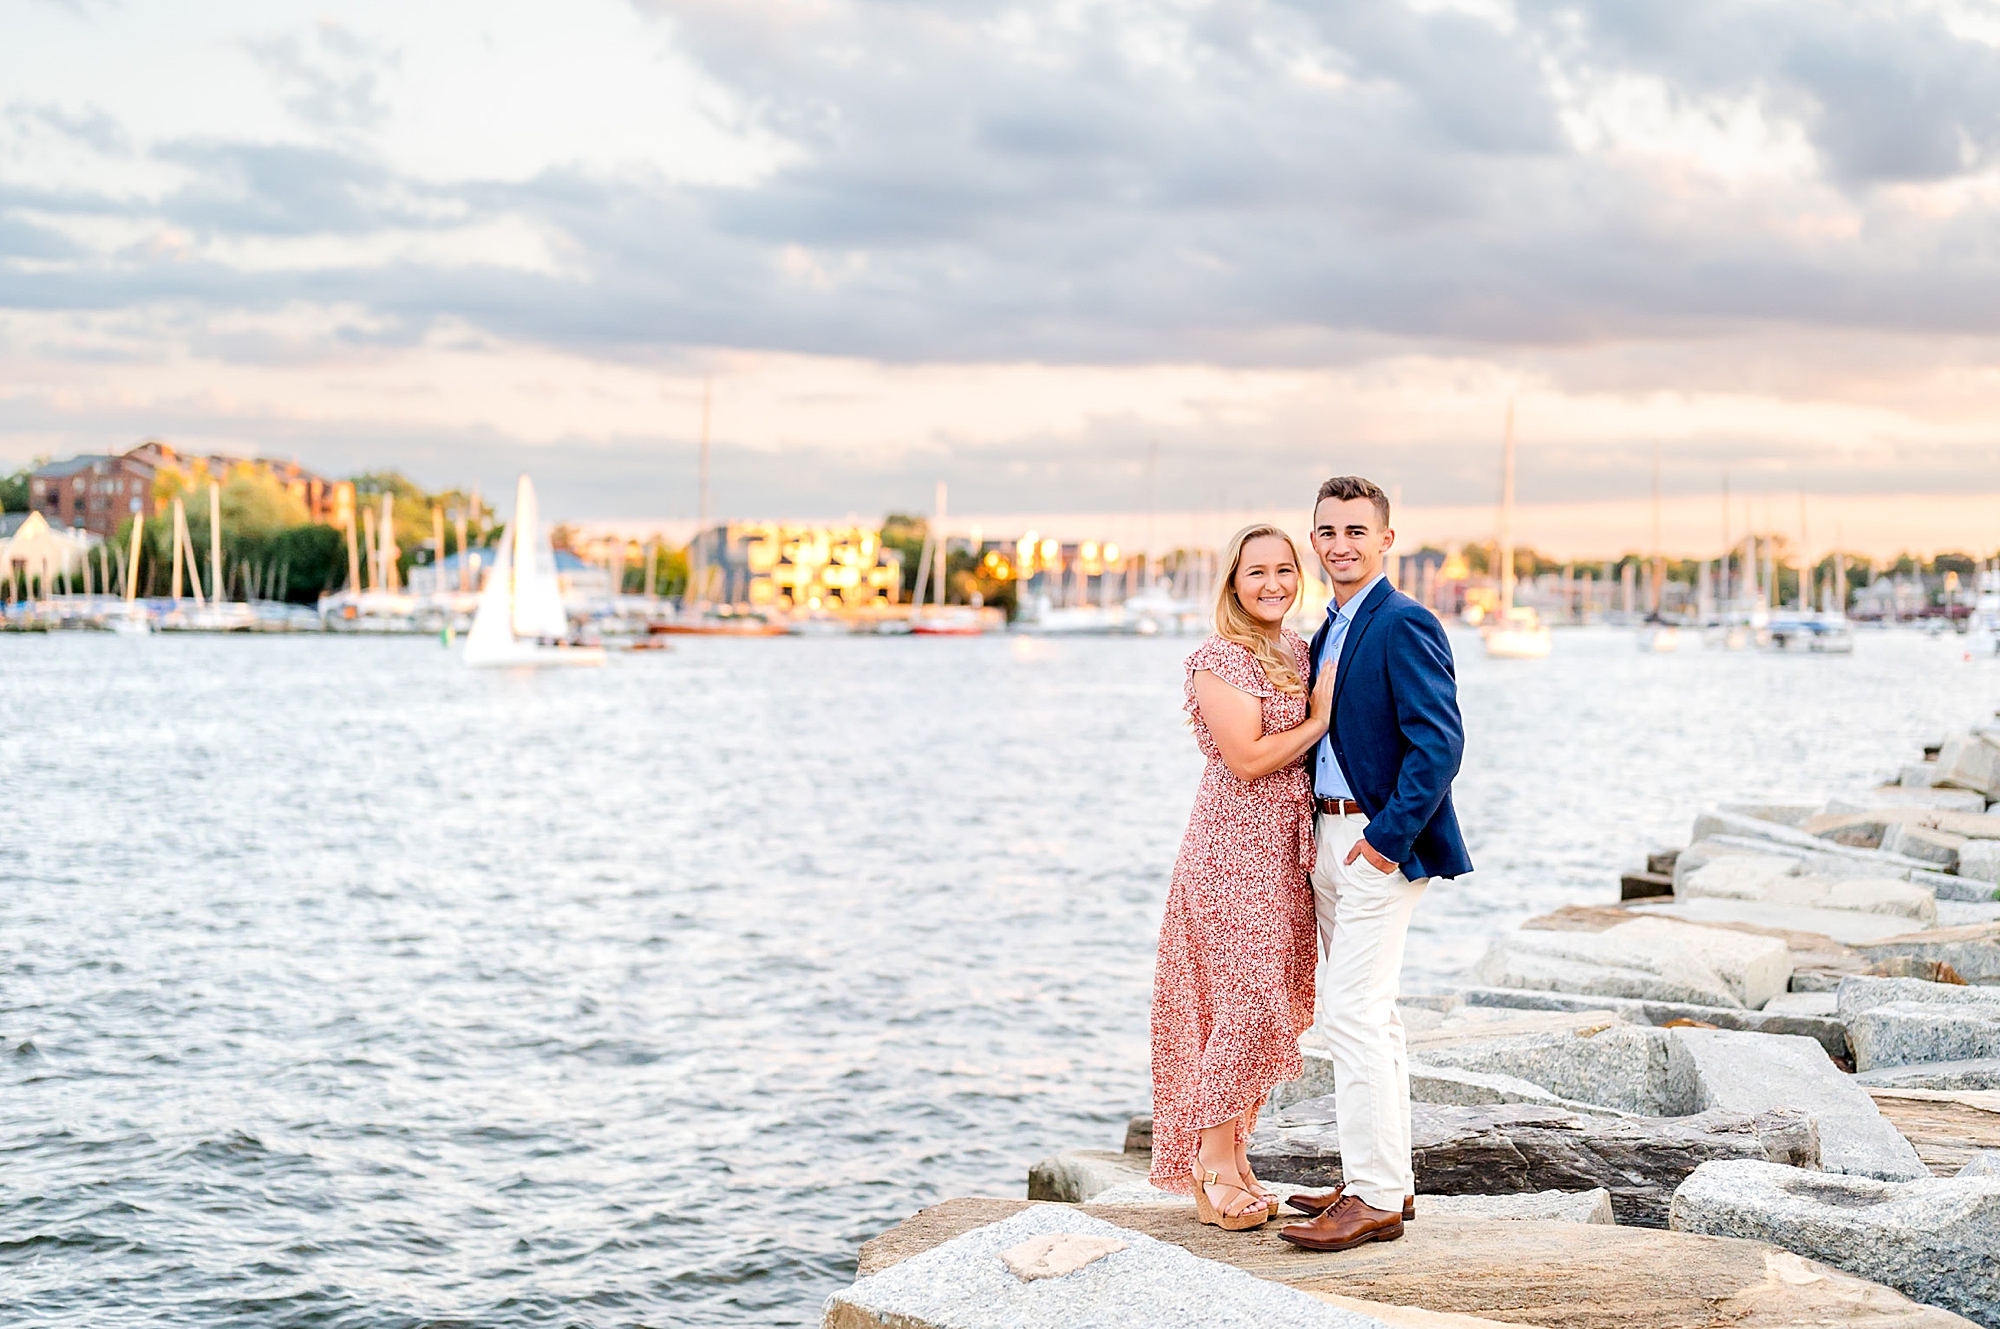 DC couple poses along waterfront in nice outfits during engagement photos